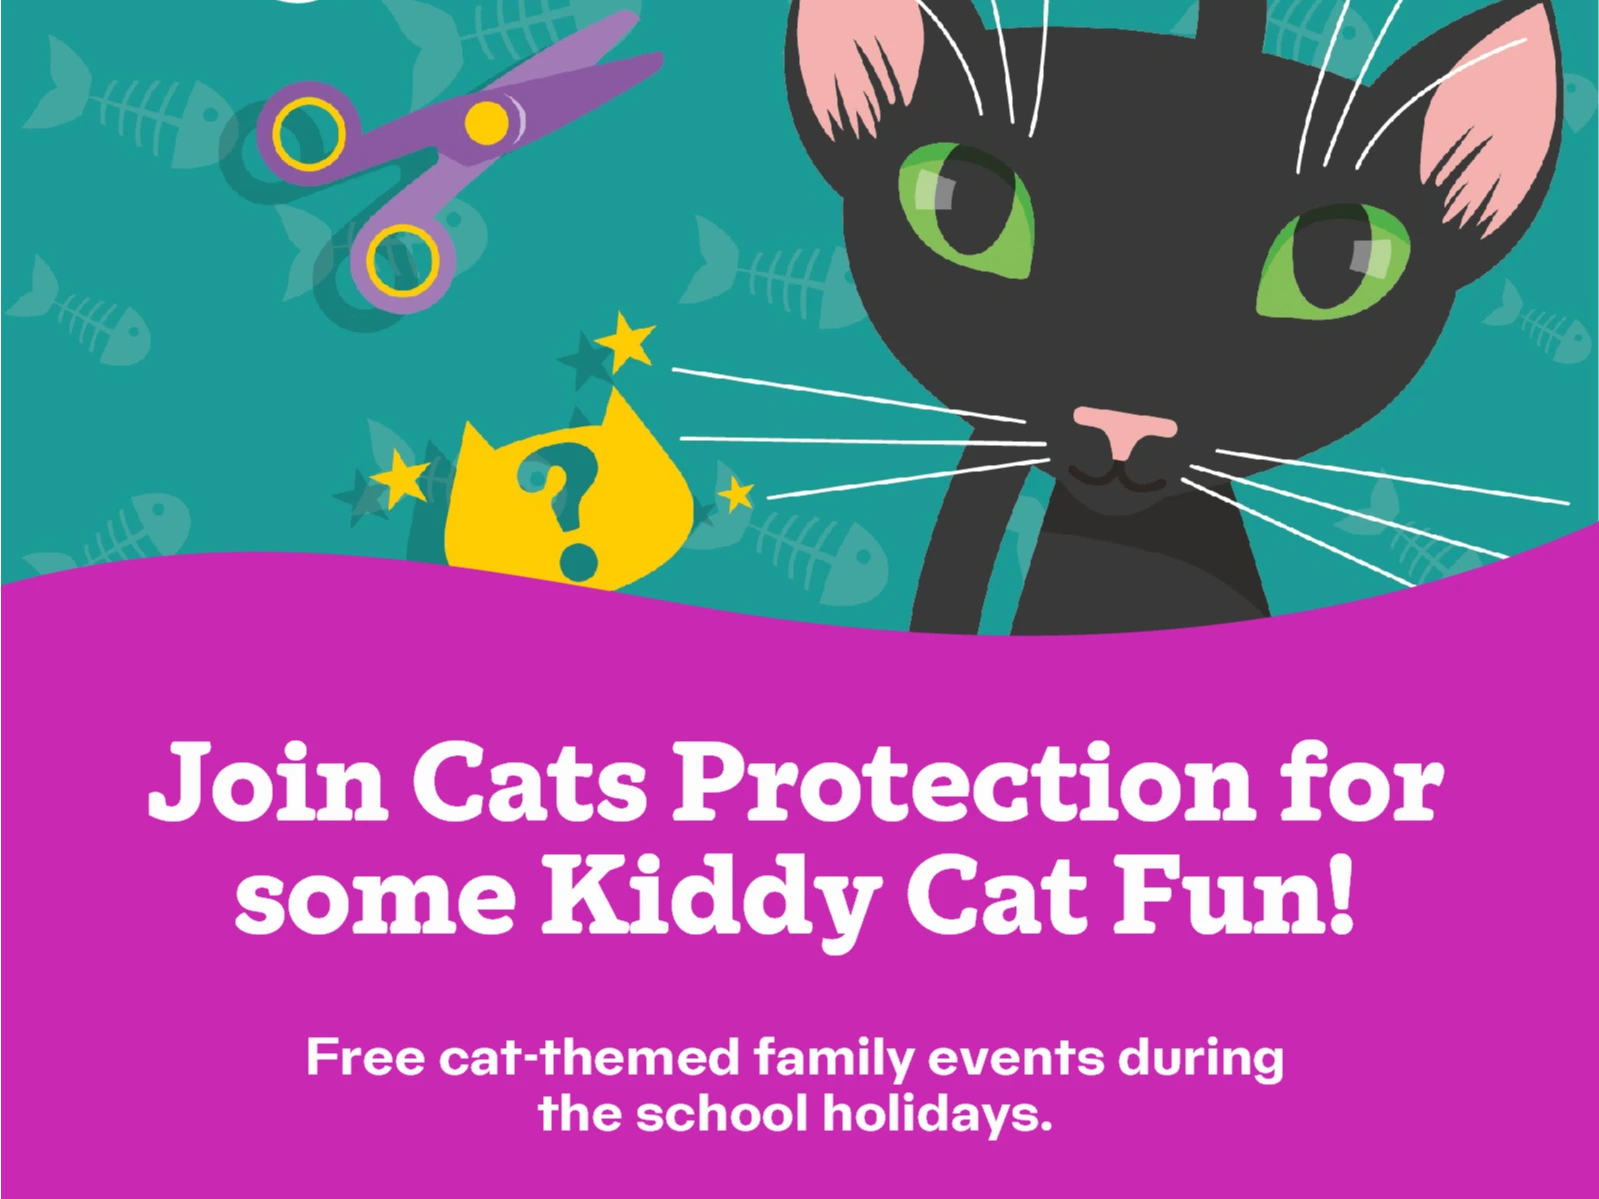 Join us at Cats Protection for some Kiddy Cat fun